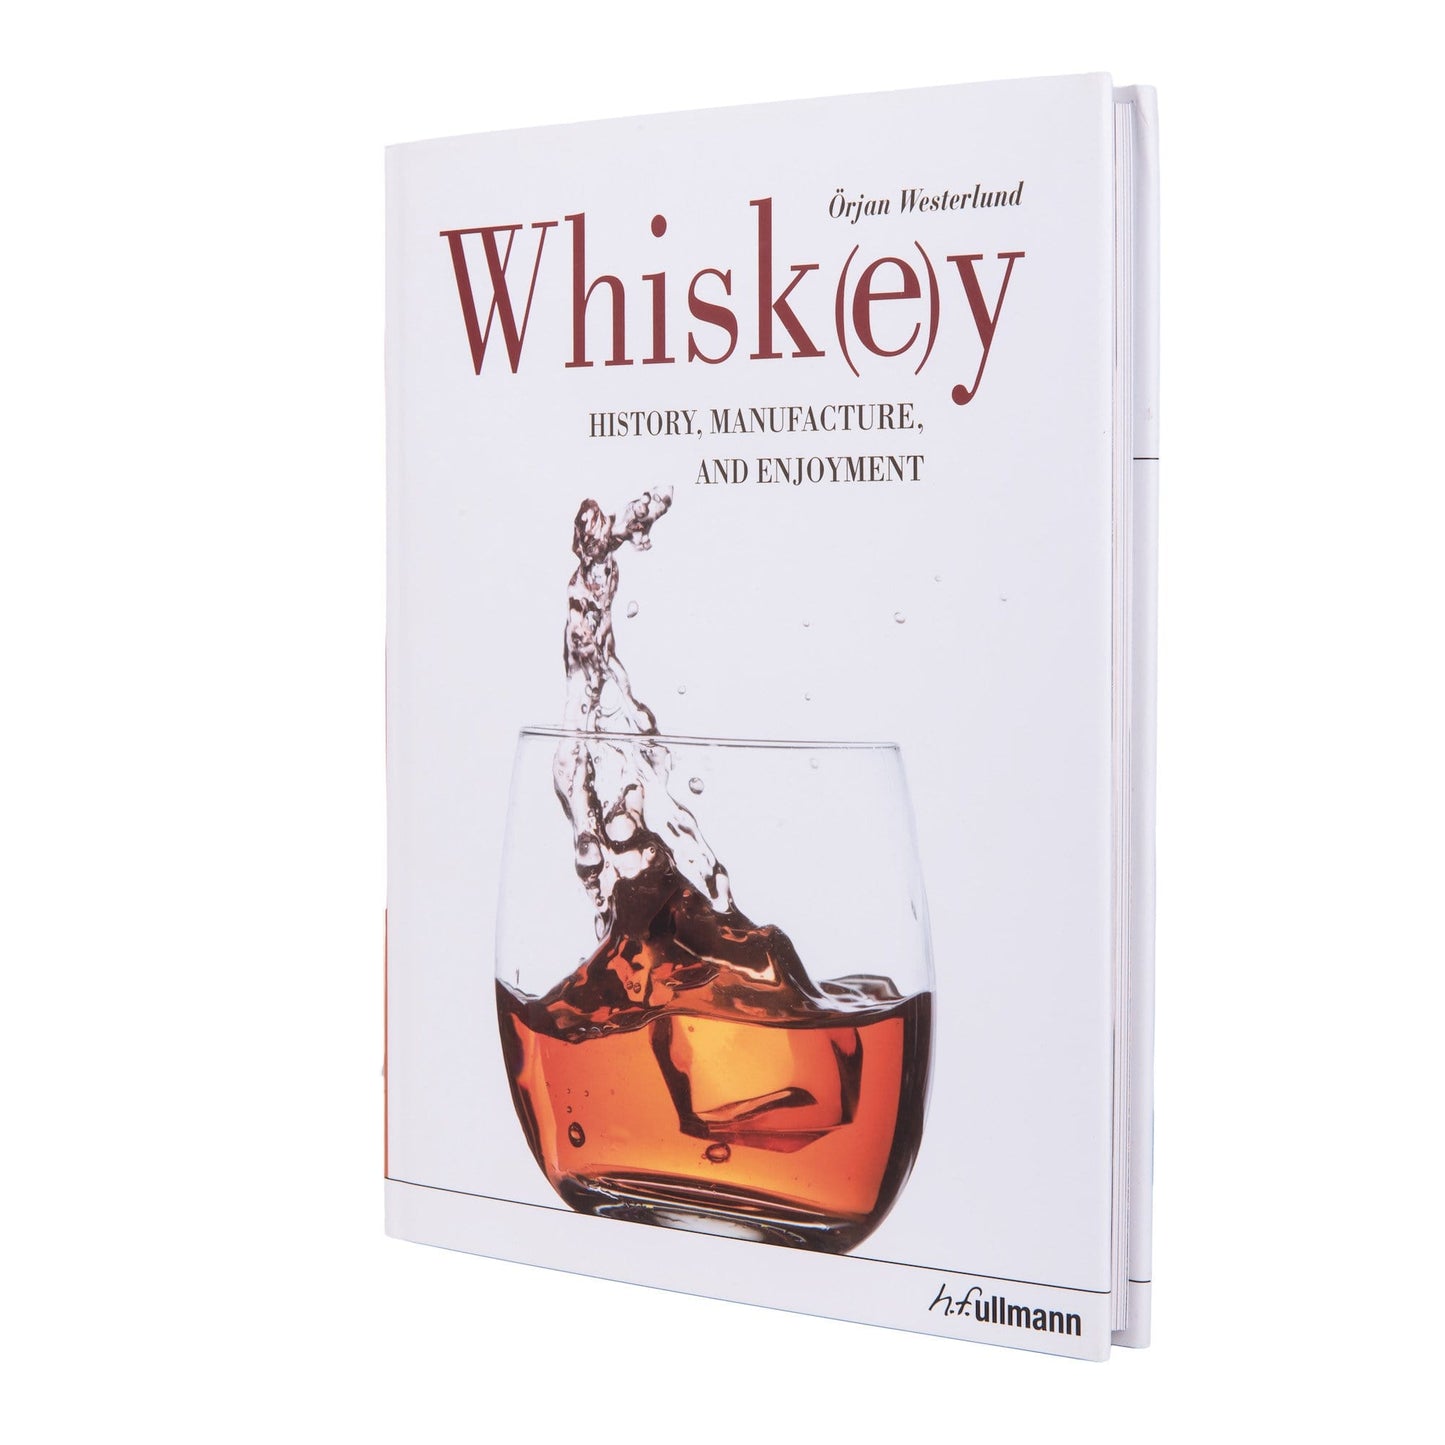 Whisk(e)y: History, Manufacture and Enjoyment - EC Proof